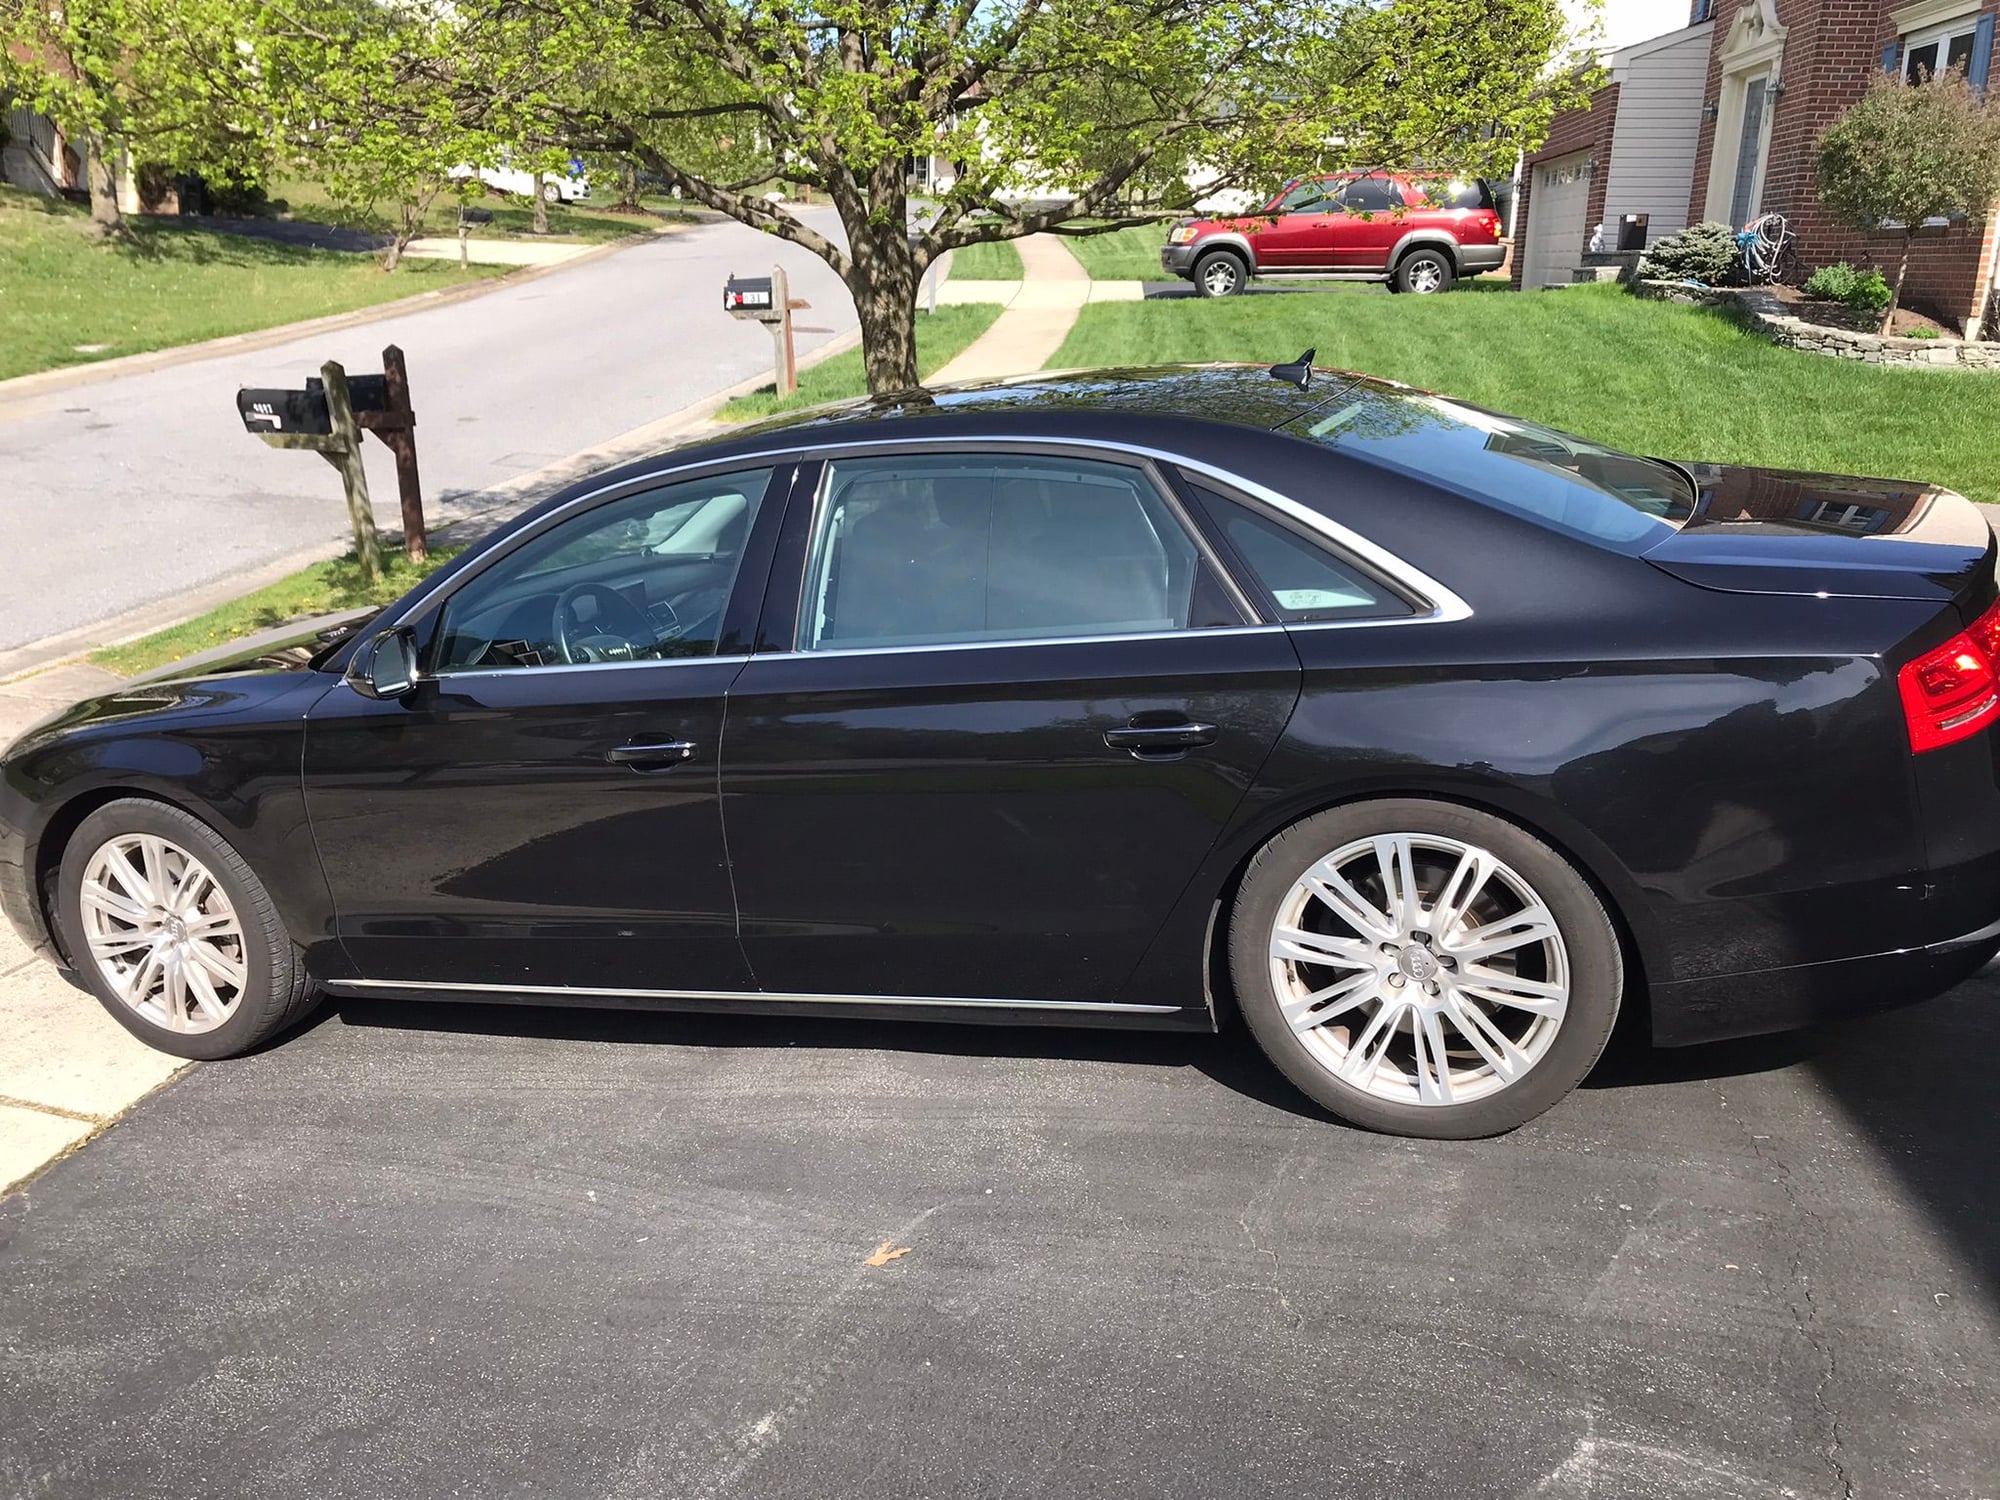 2012 Audi A8 Quattro - 2012 Audi A8L, Very Well Optioned with all records. 99K Miles - Howard County, MD. - Used - Howard County, MD 21045, United States